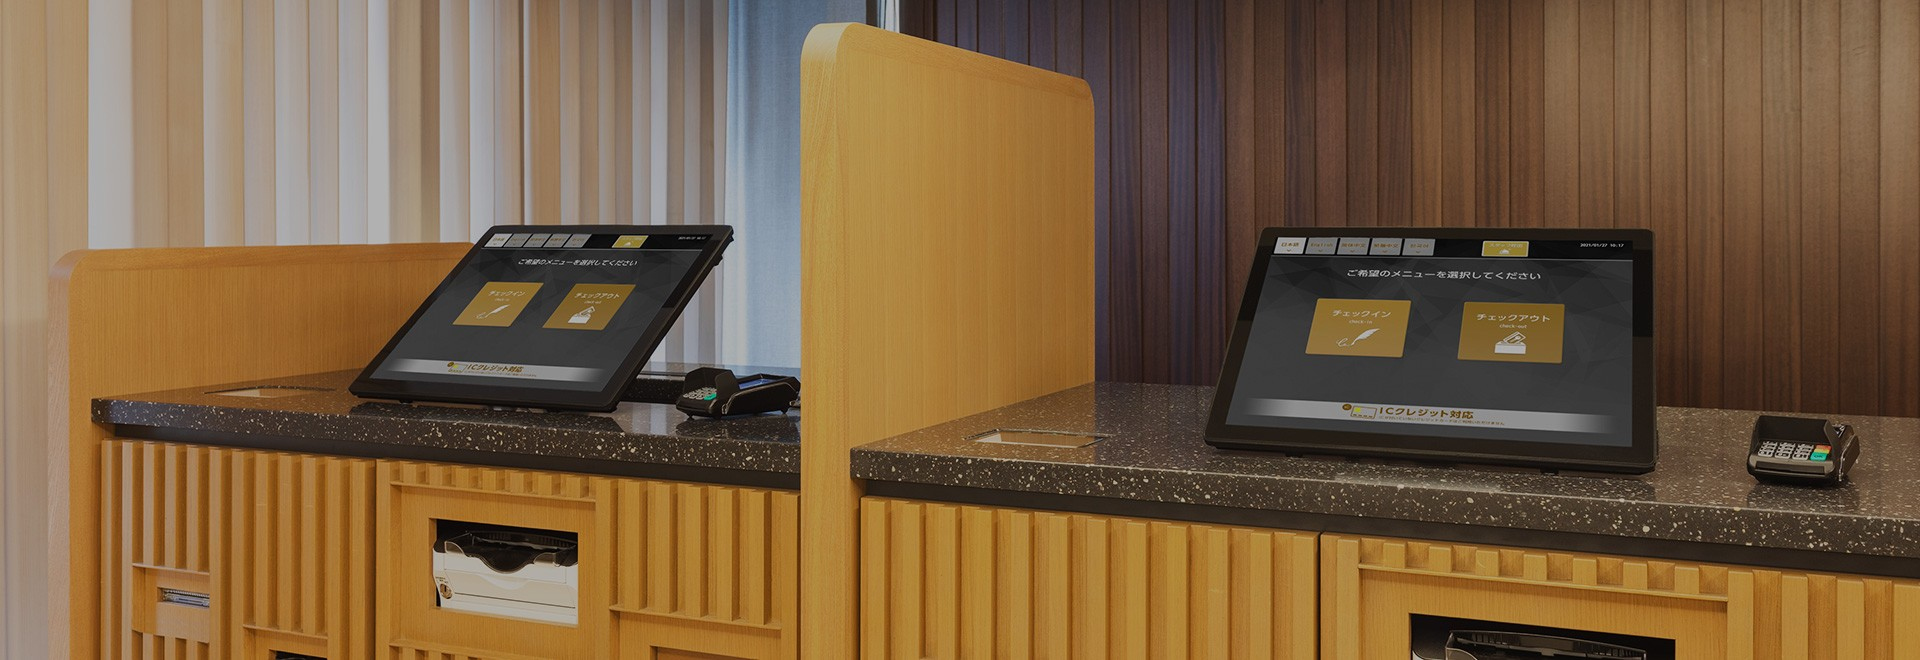 Procedures are easy with our self Check-in/Check-out machine